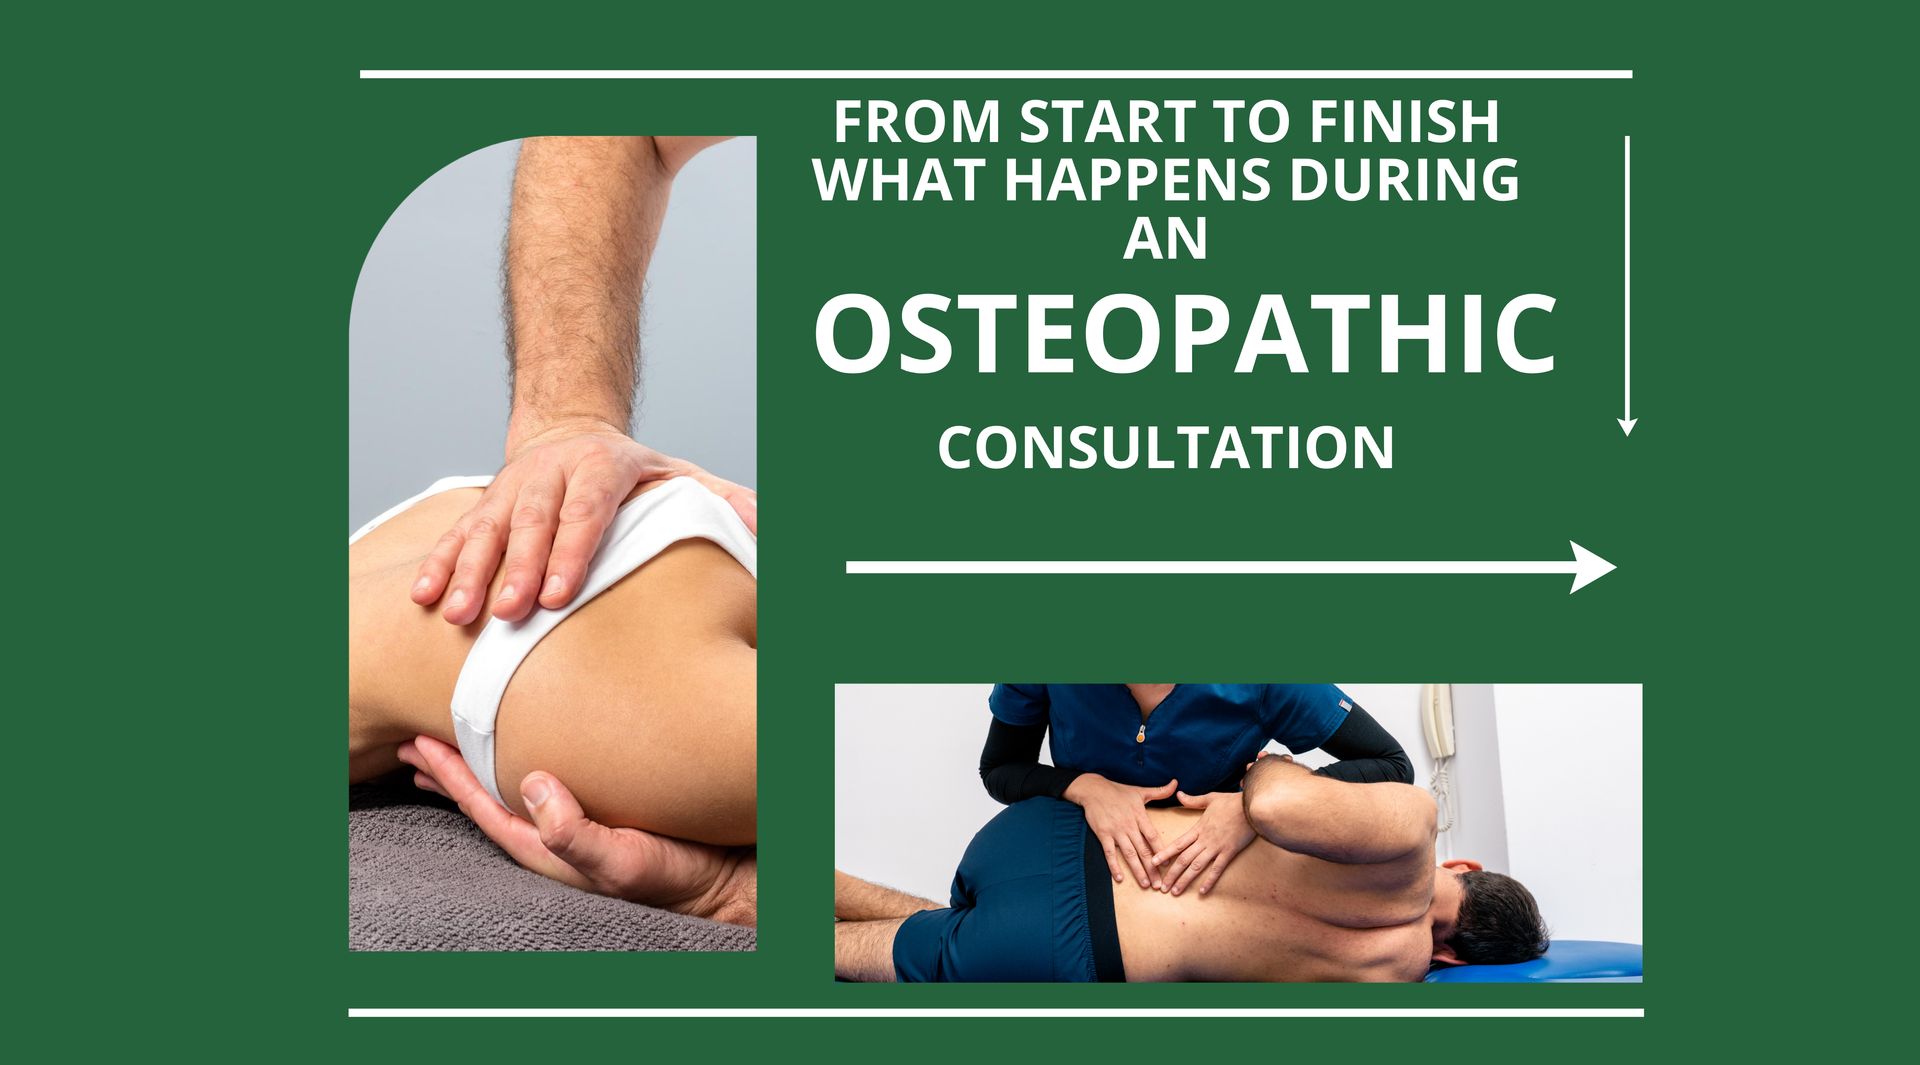 From Start to Finish: What Happens During an Osteopathic Consultation